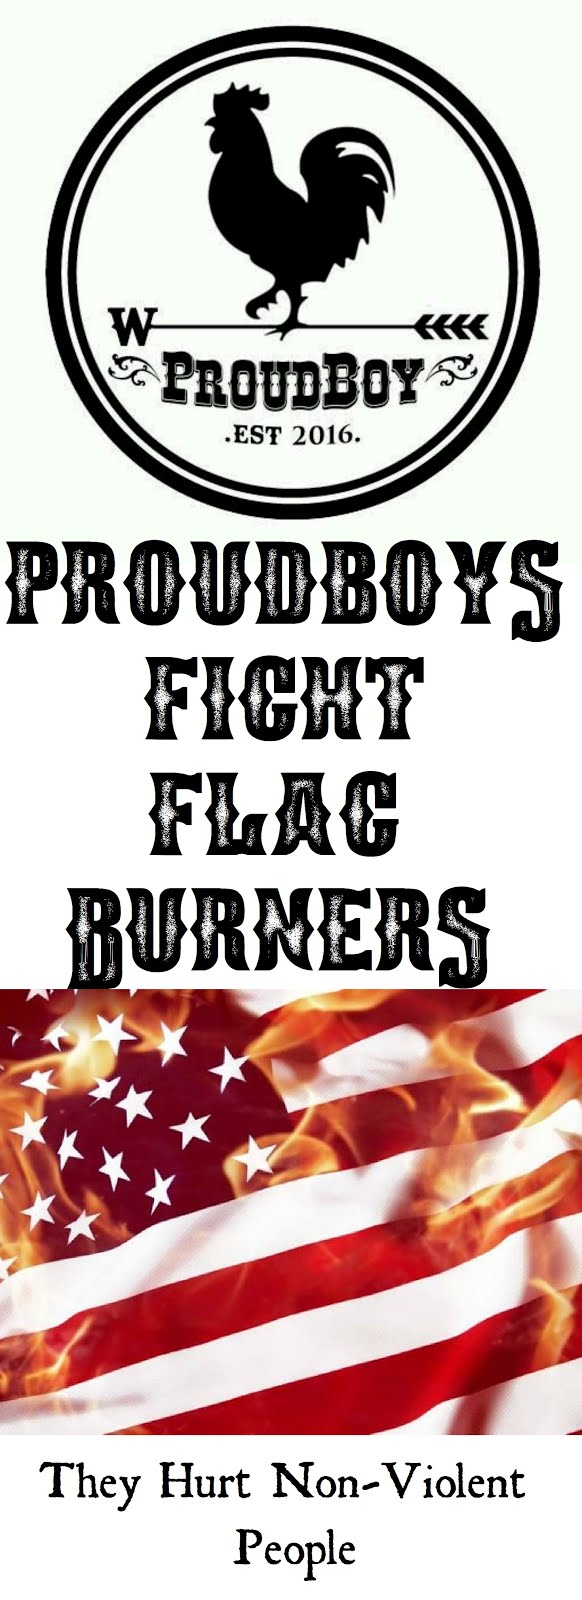 The ProudBoys Broke Their Good Image Of Defenders On July 4th.